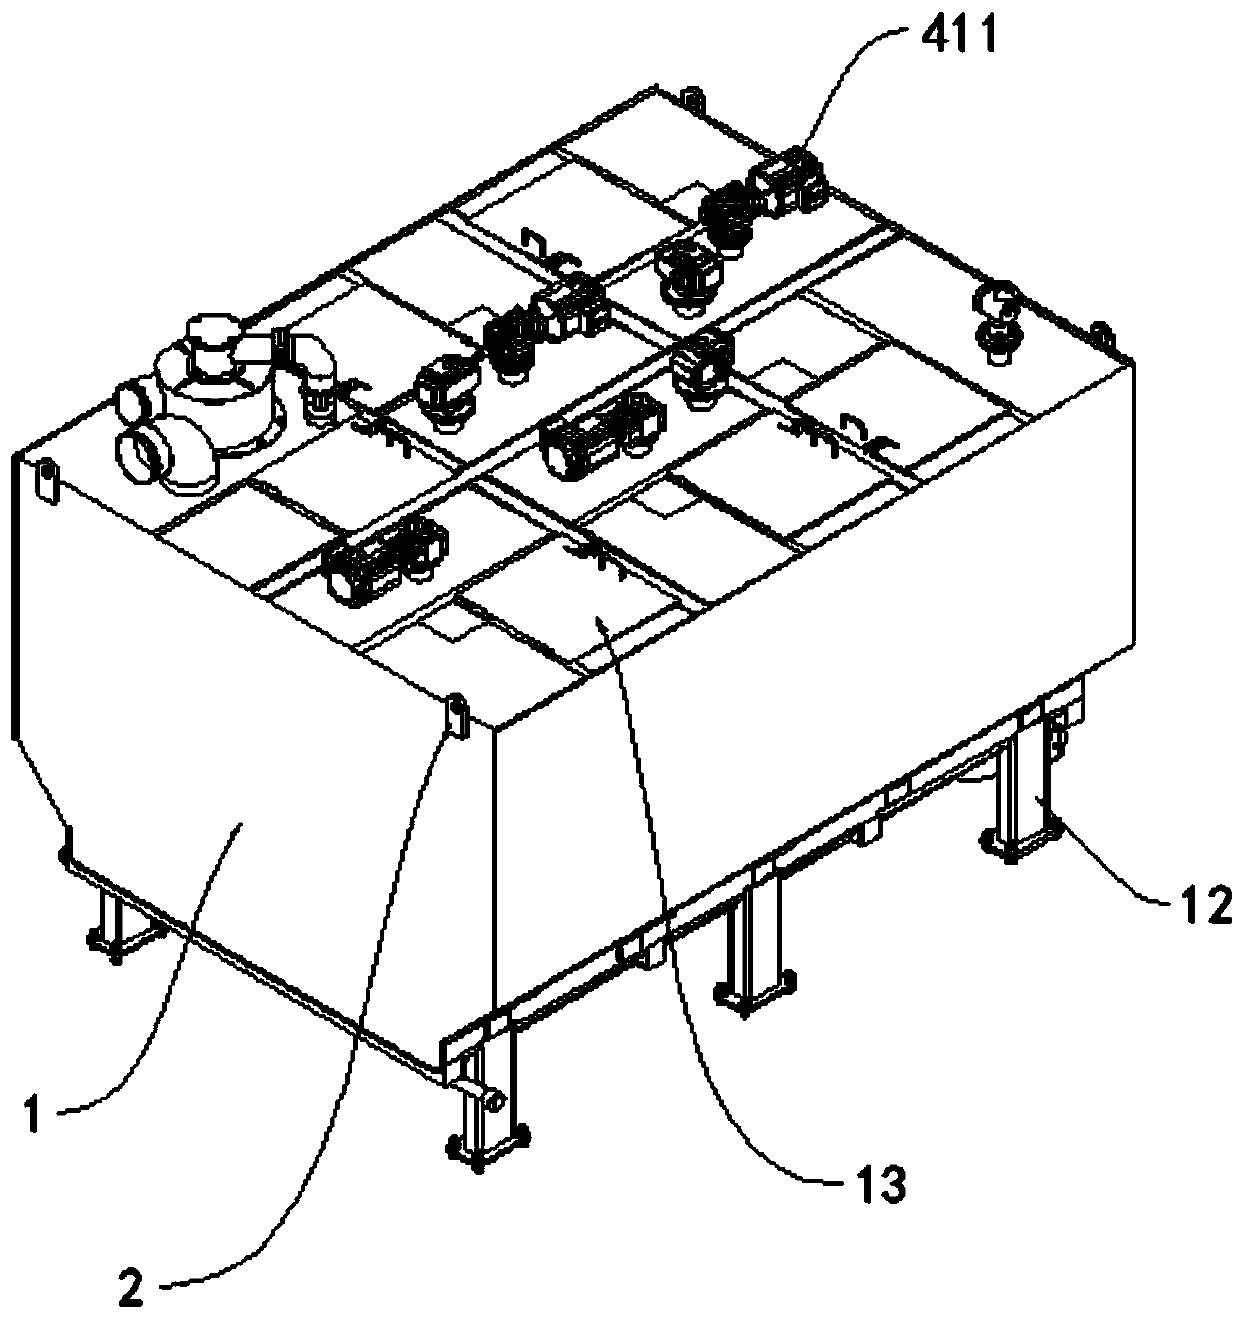 Special device for mixing fracturing fluid